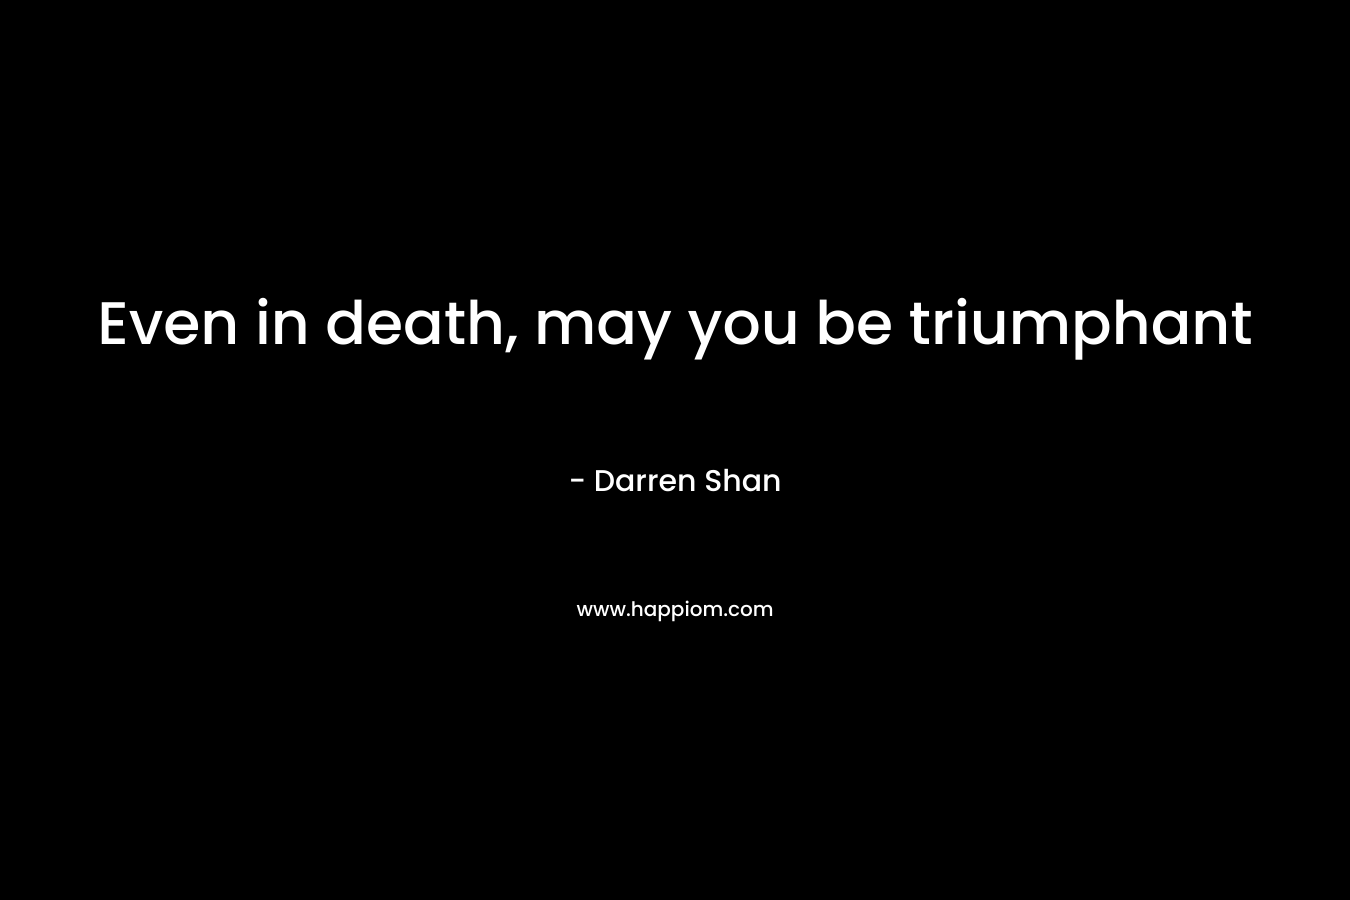 Even in death, may you be triumphant